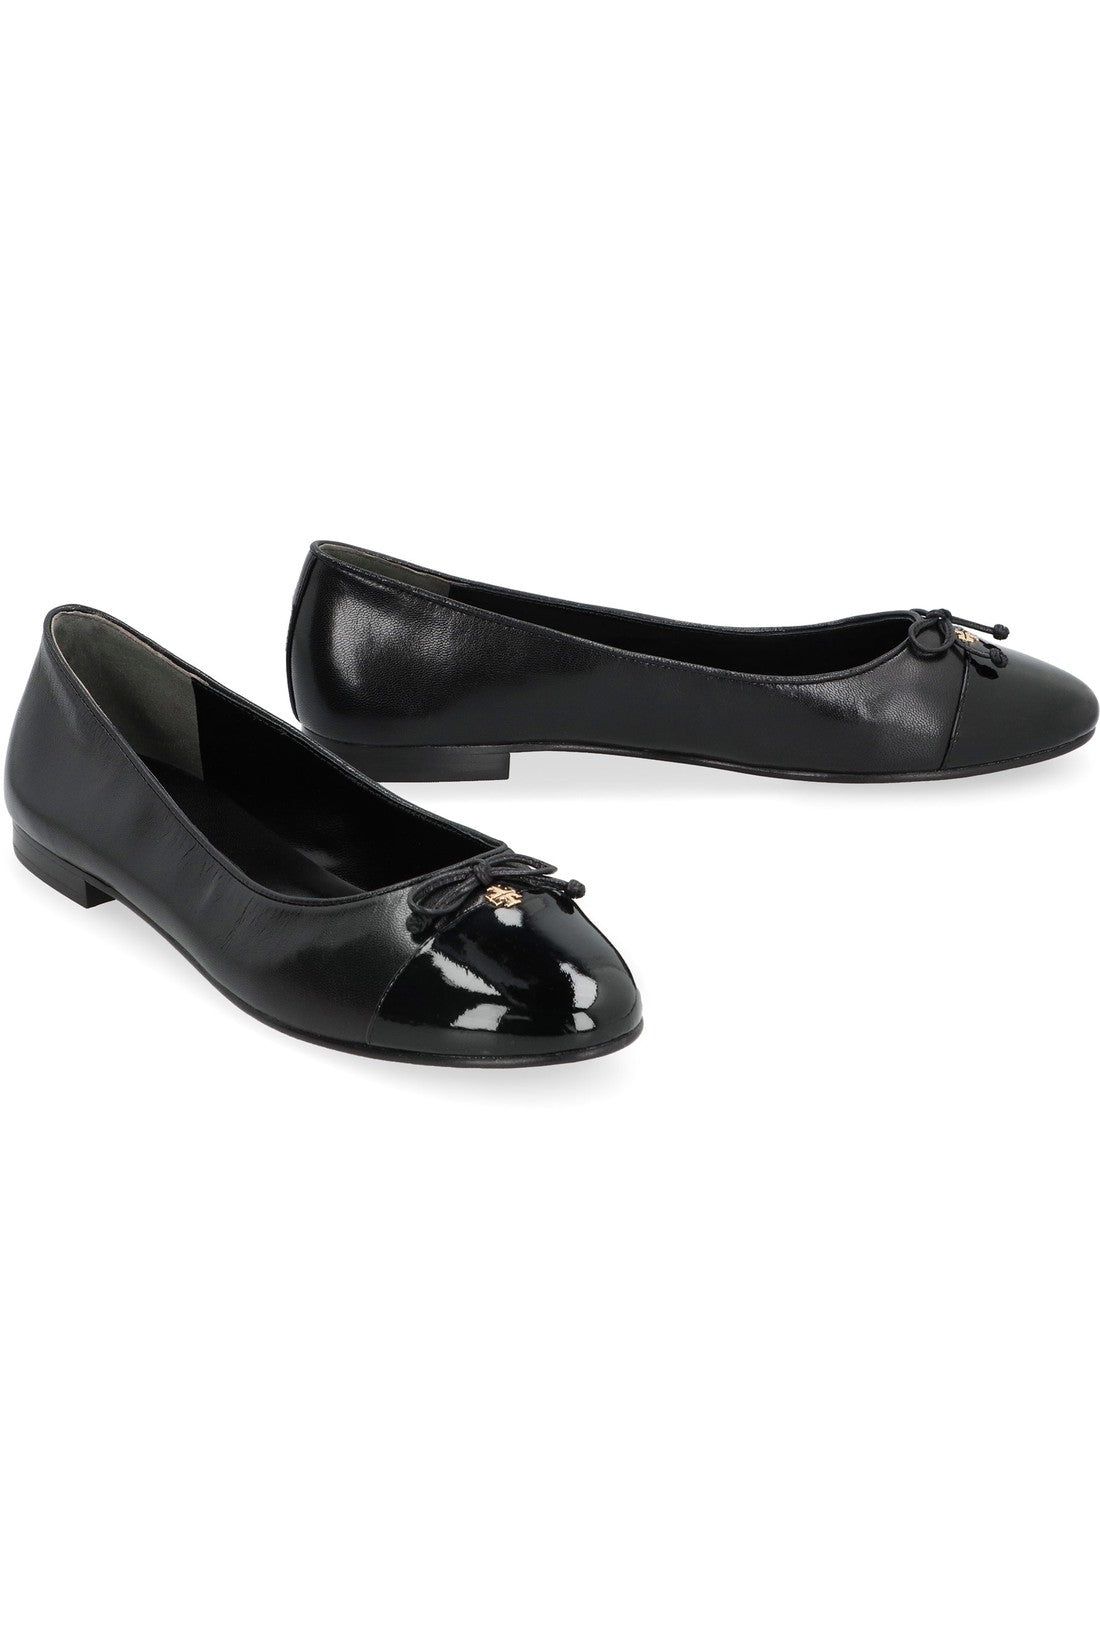 Tory Burch-OUTLET-SALE-Leather ballet flats with logo-ARCHIVIST